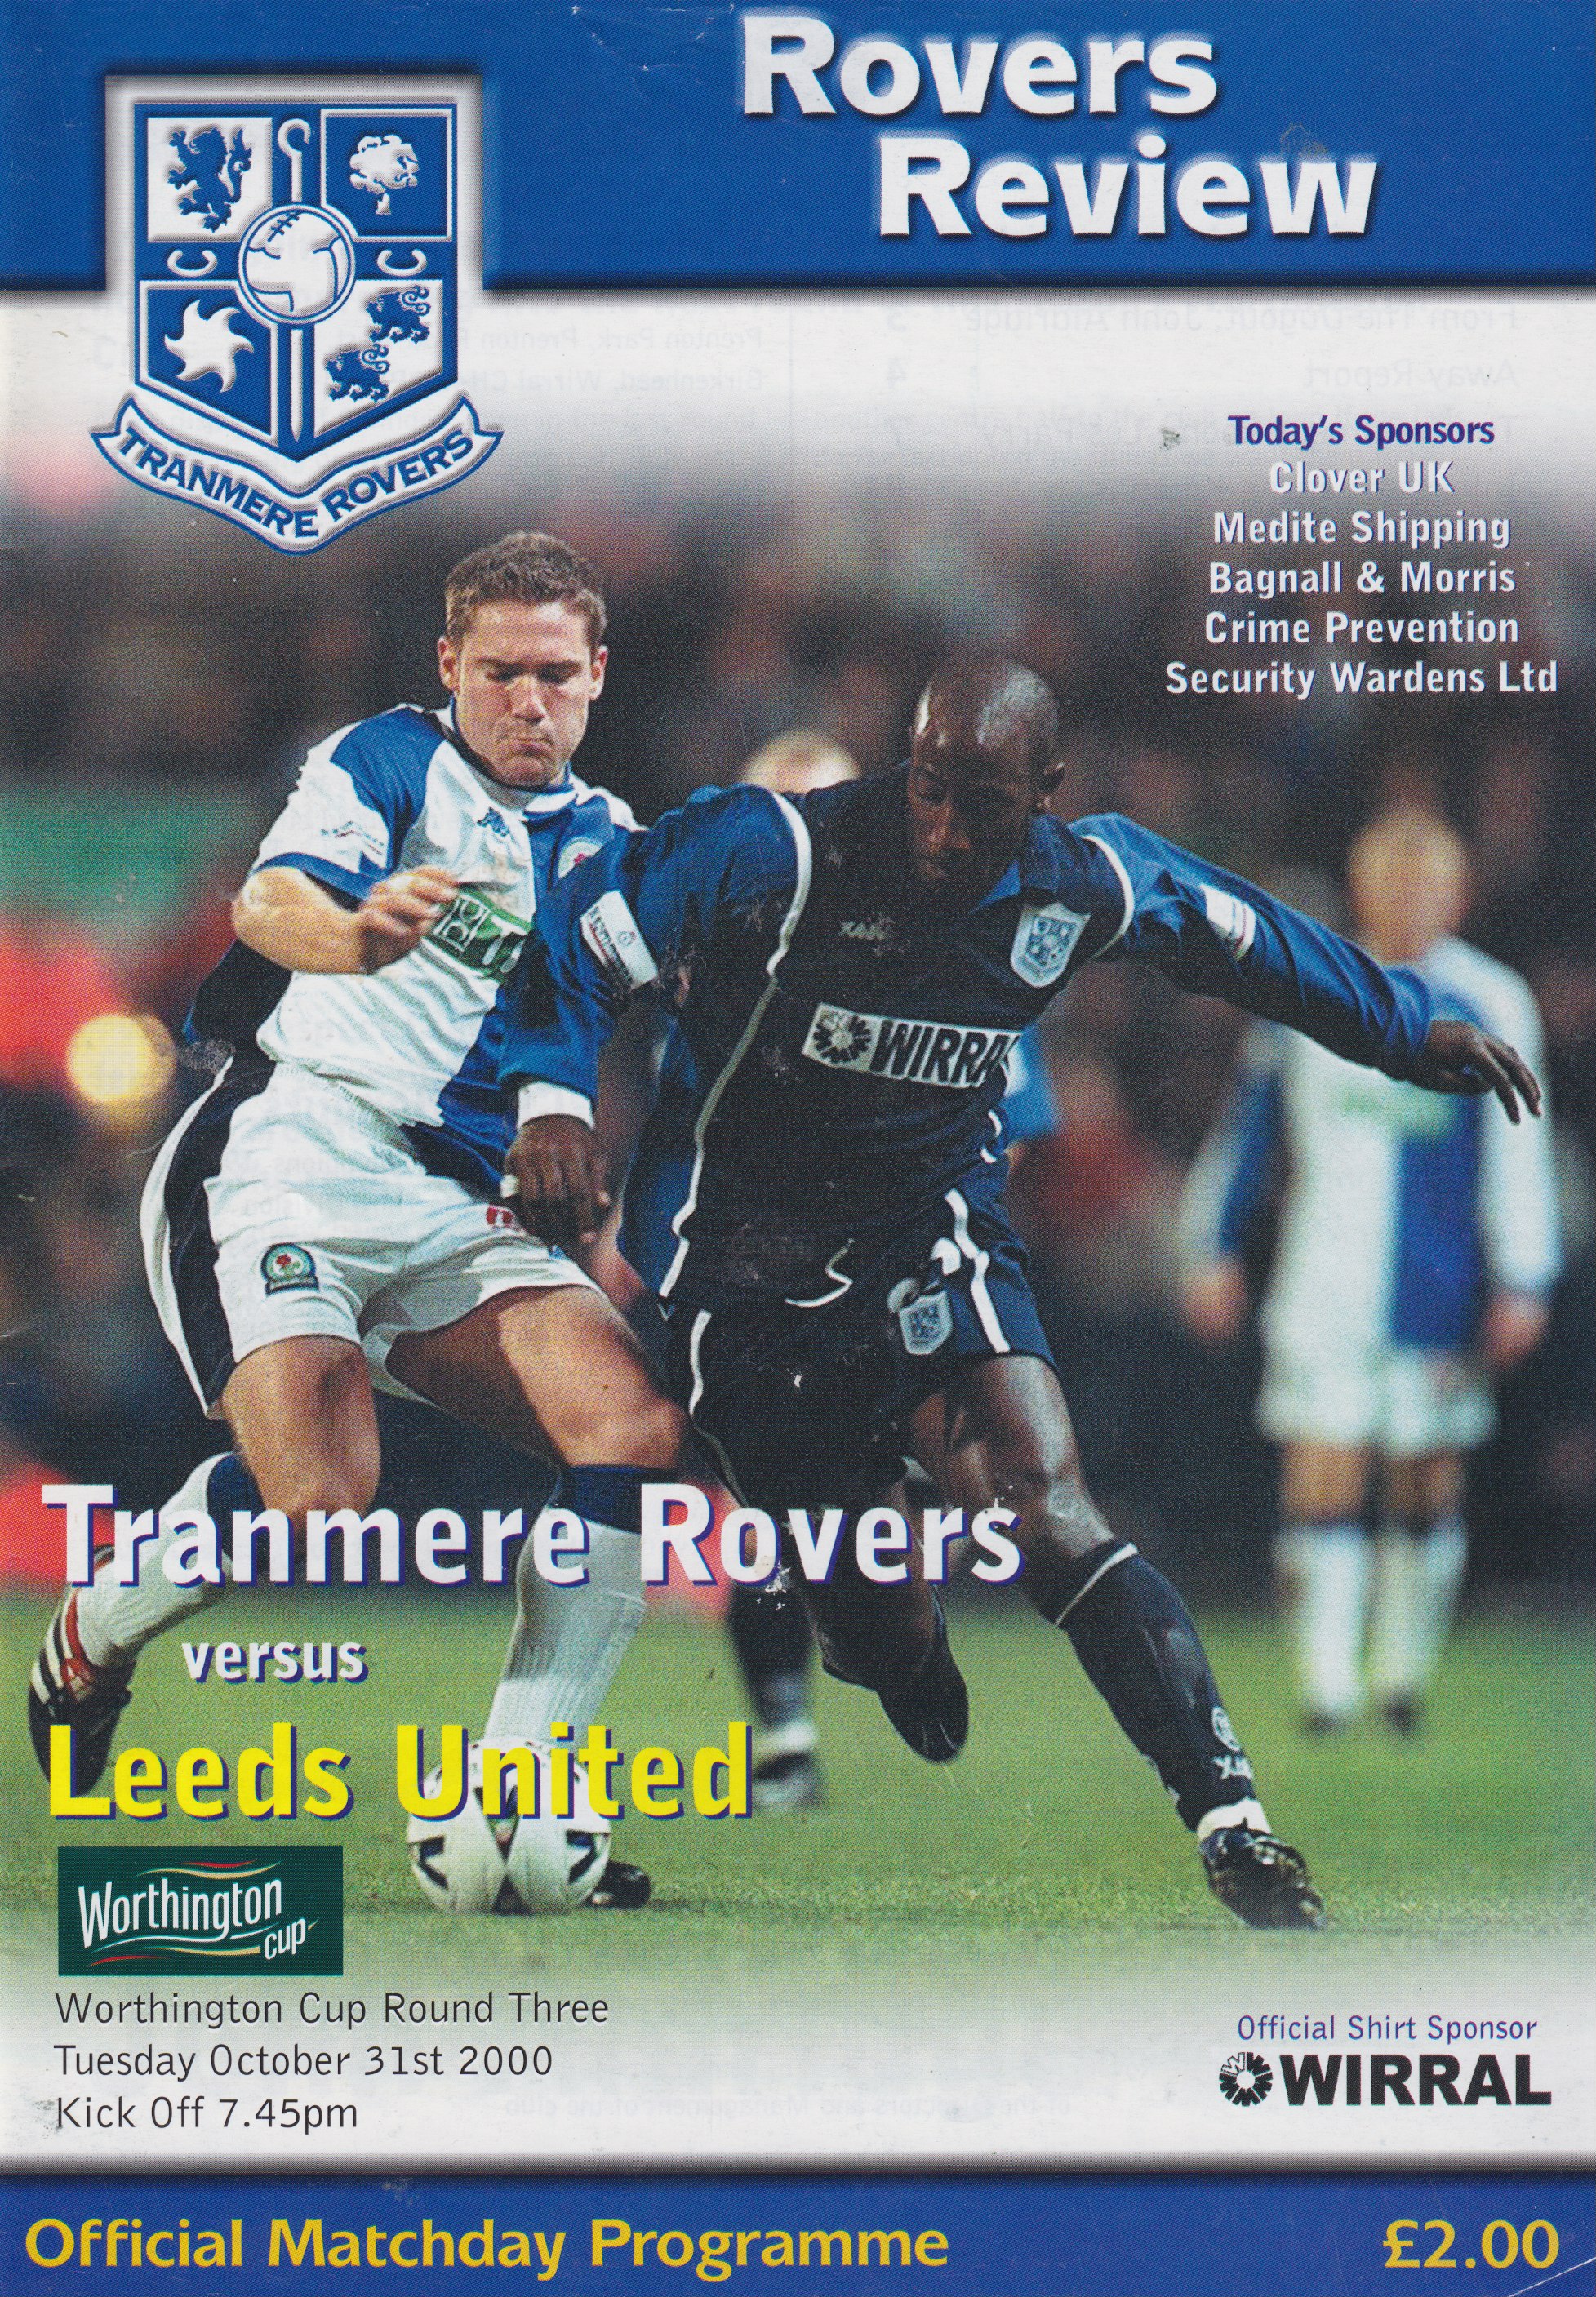 Match Programme For {home}} 3-2 Leeds United, League Cup, 2000-10-31